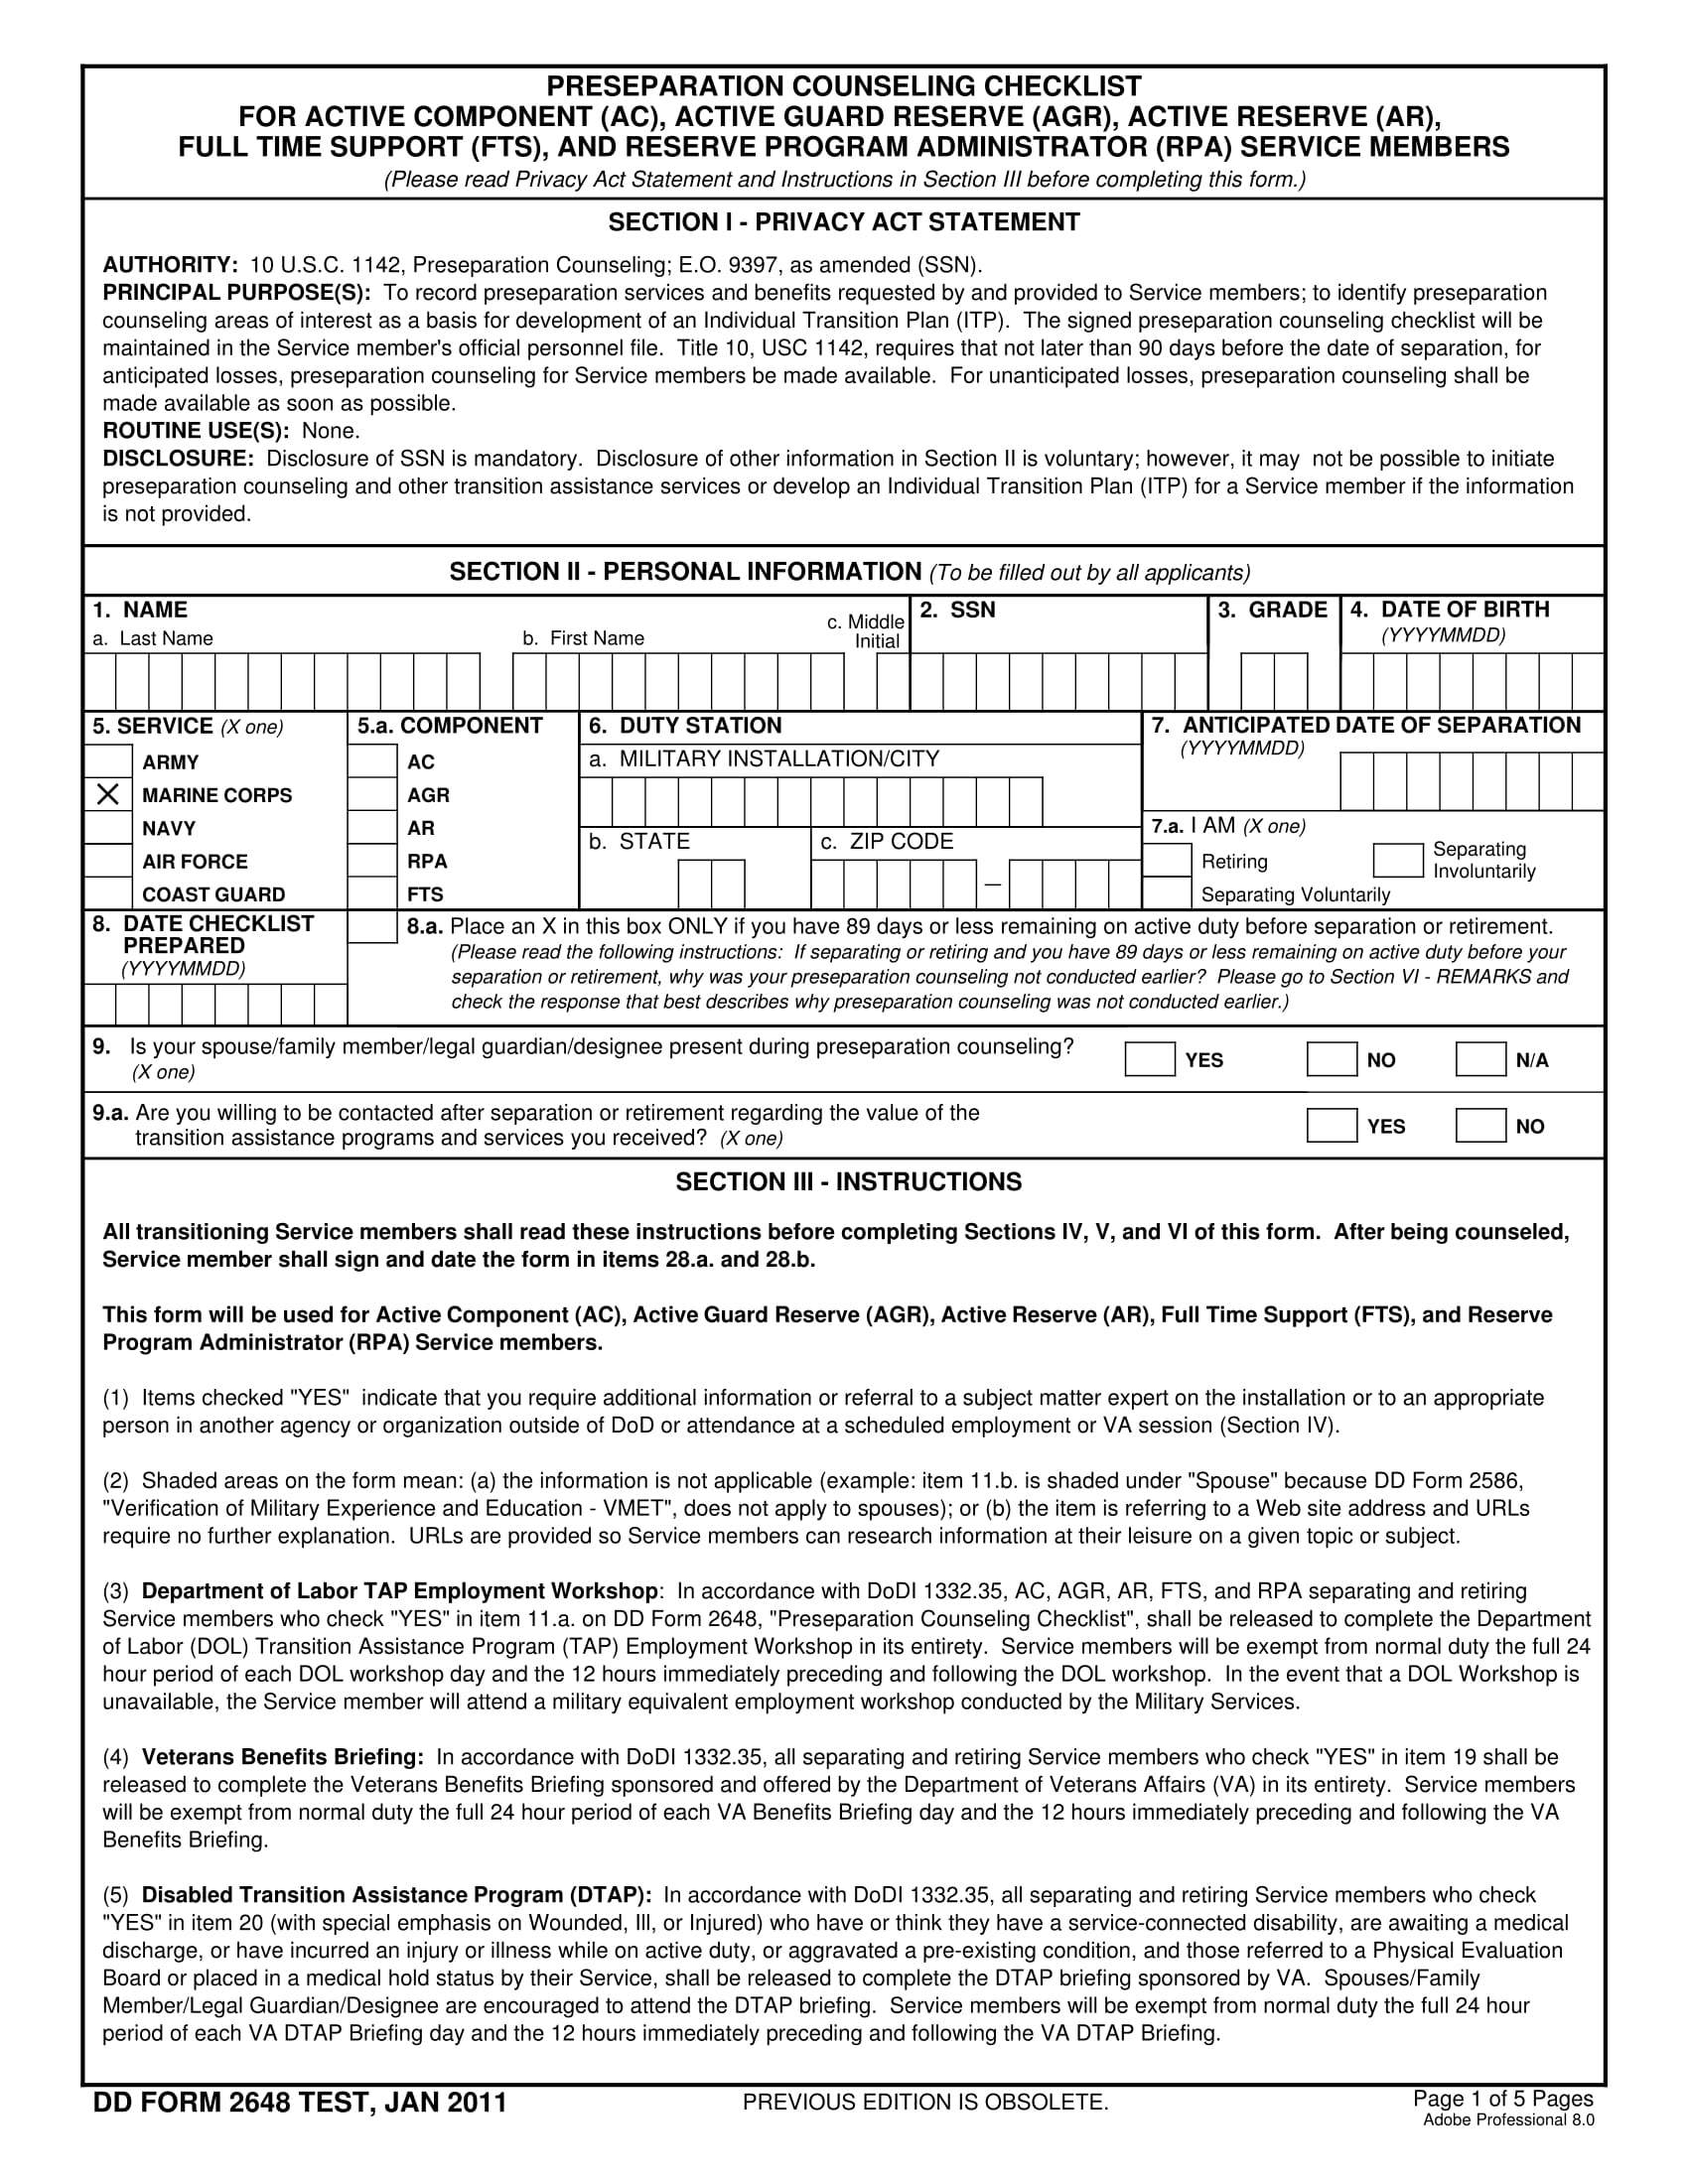 army counseling statement form 1